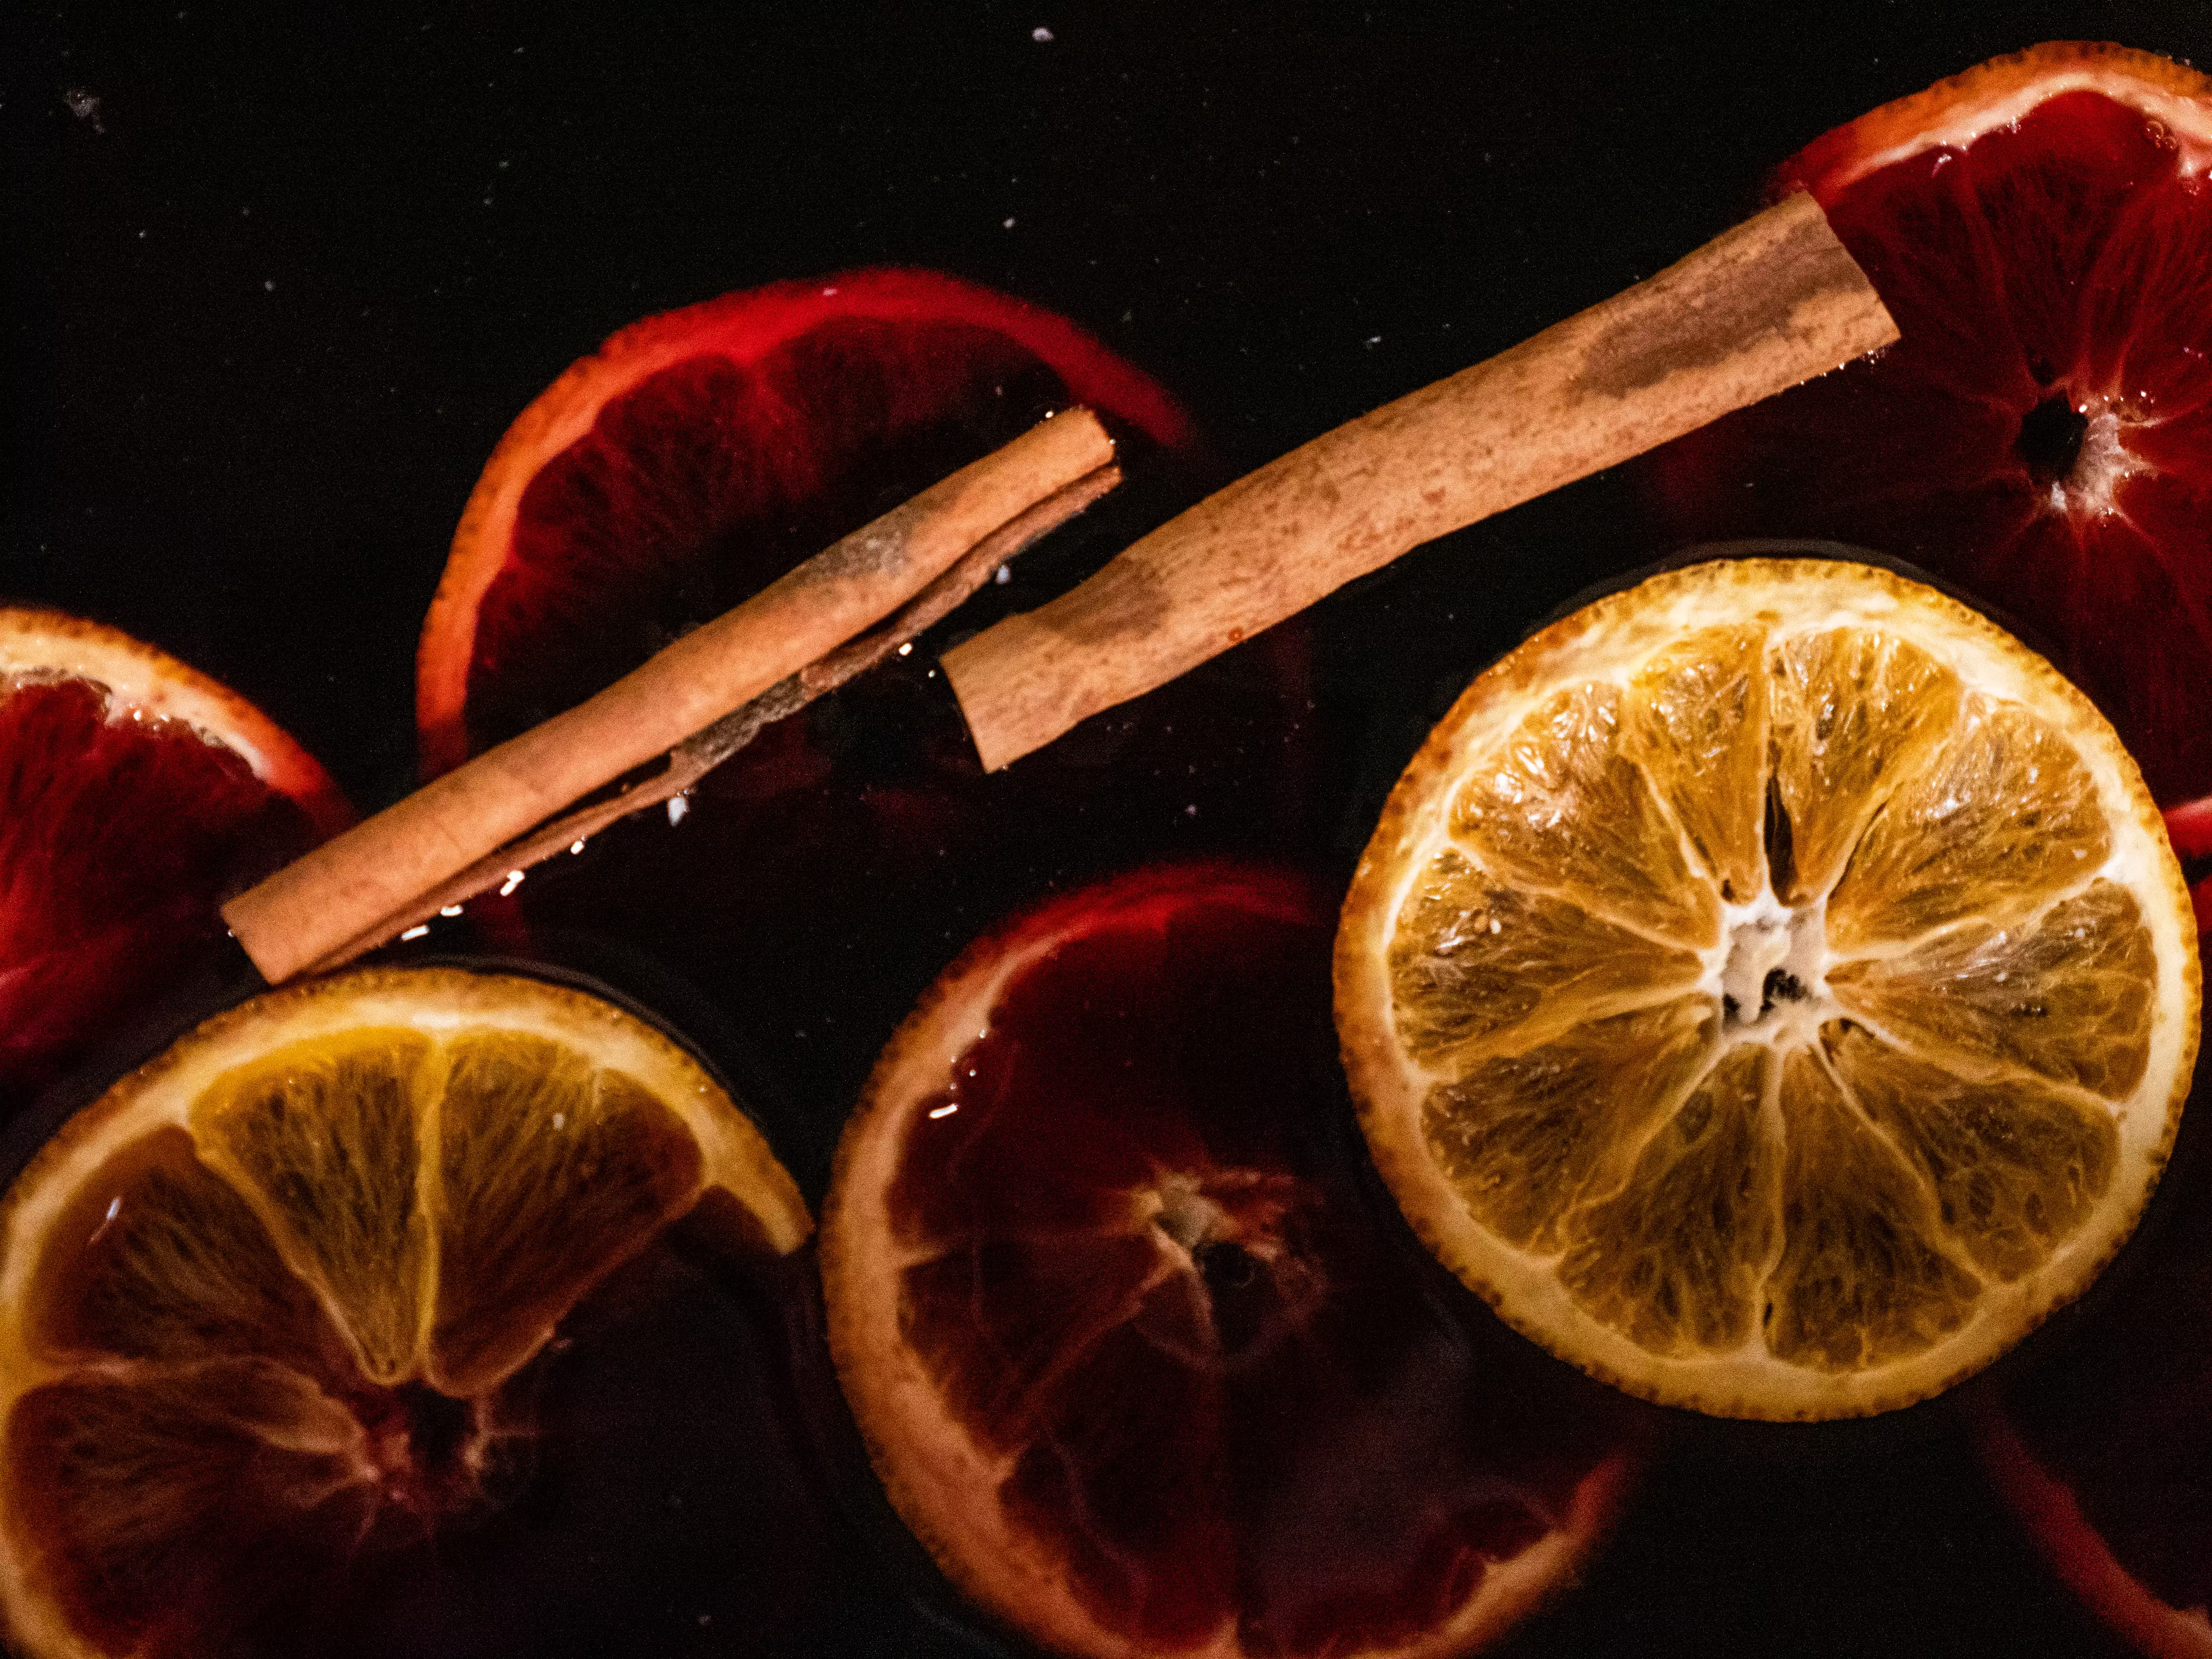 Who knew mulled wine had such great anti-oxidising properties? (